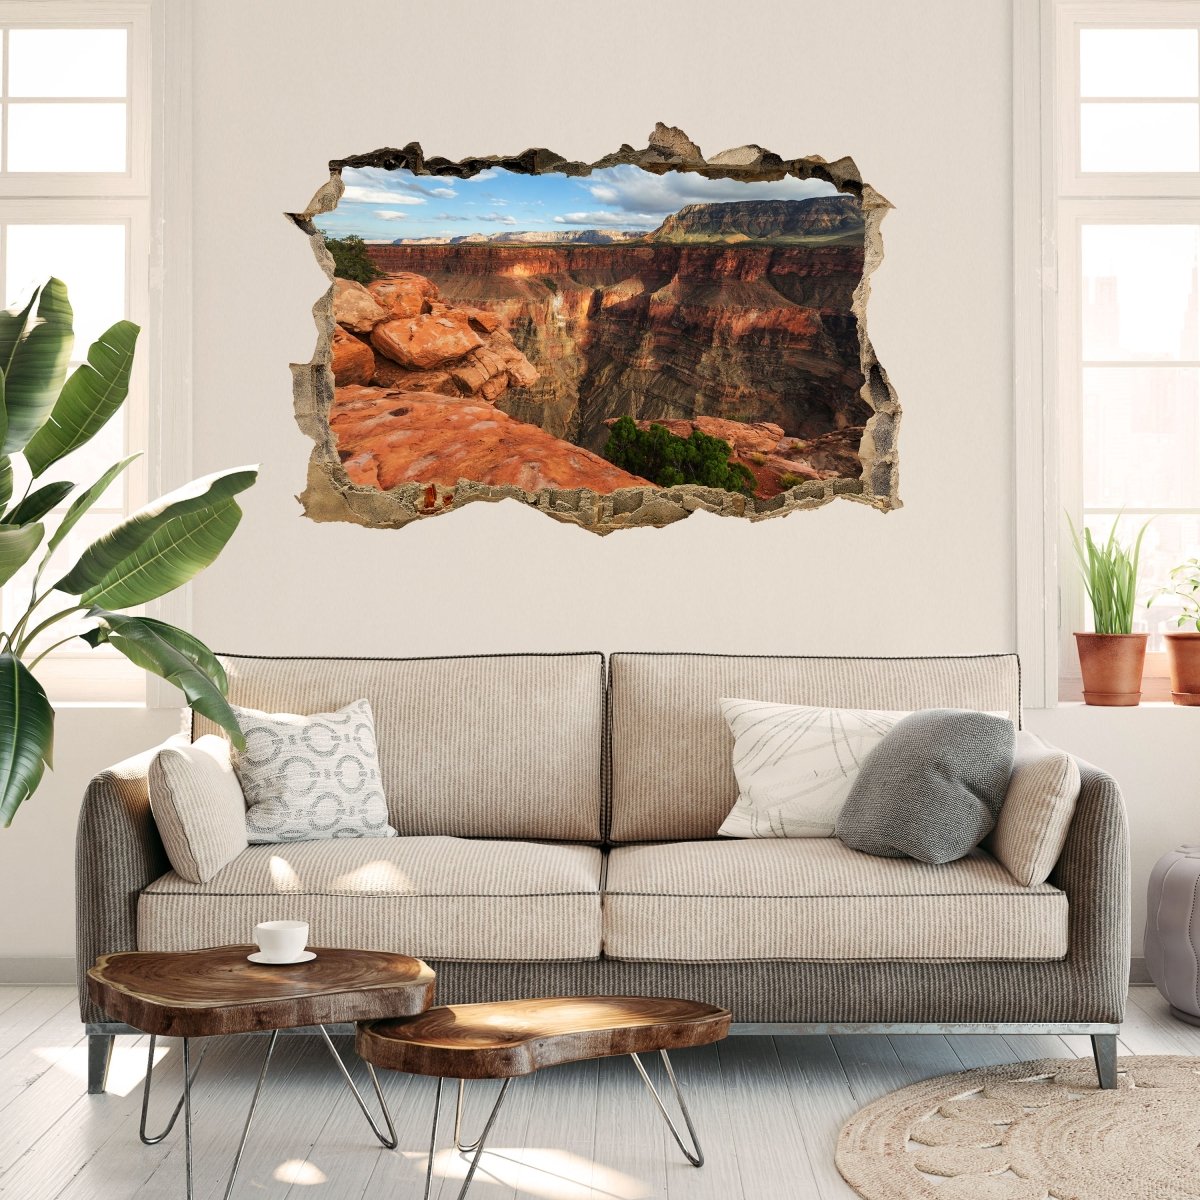 3D Wall Sticker The Grand Canyon - Wall Decal M1017